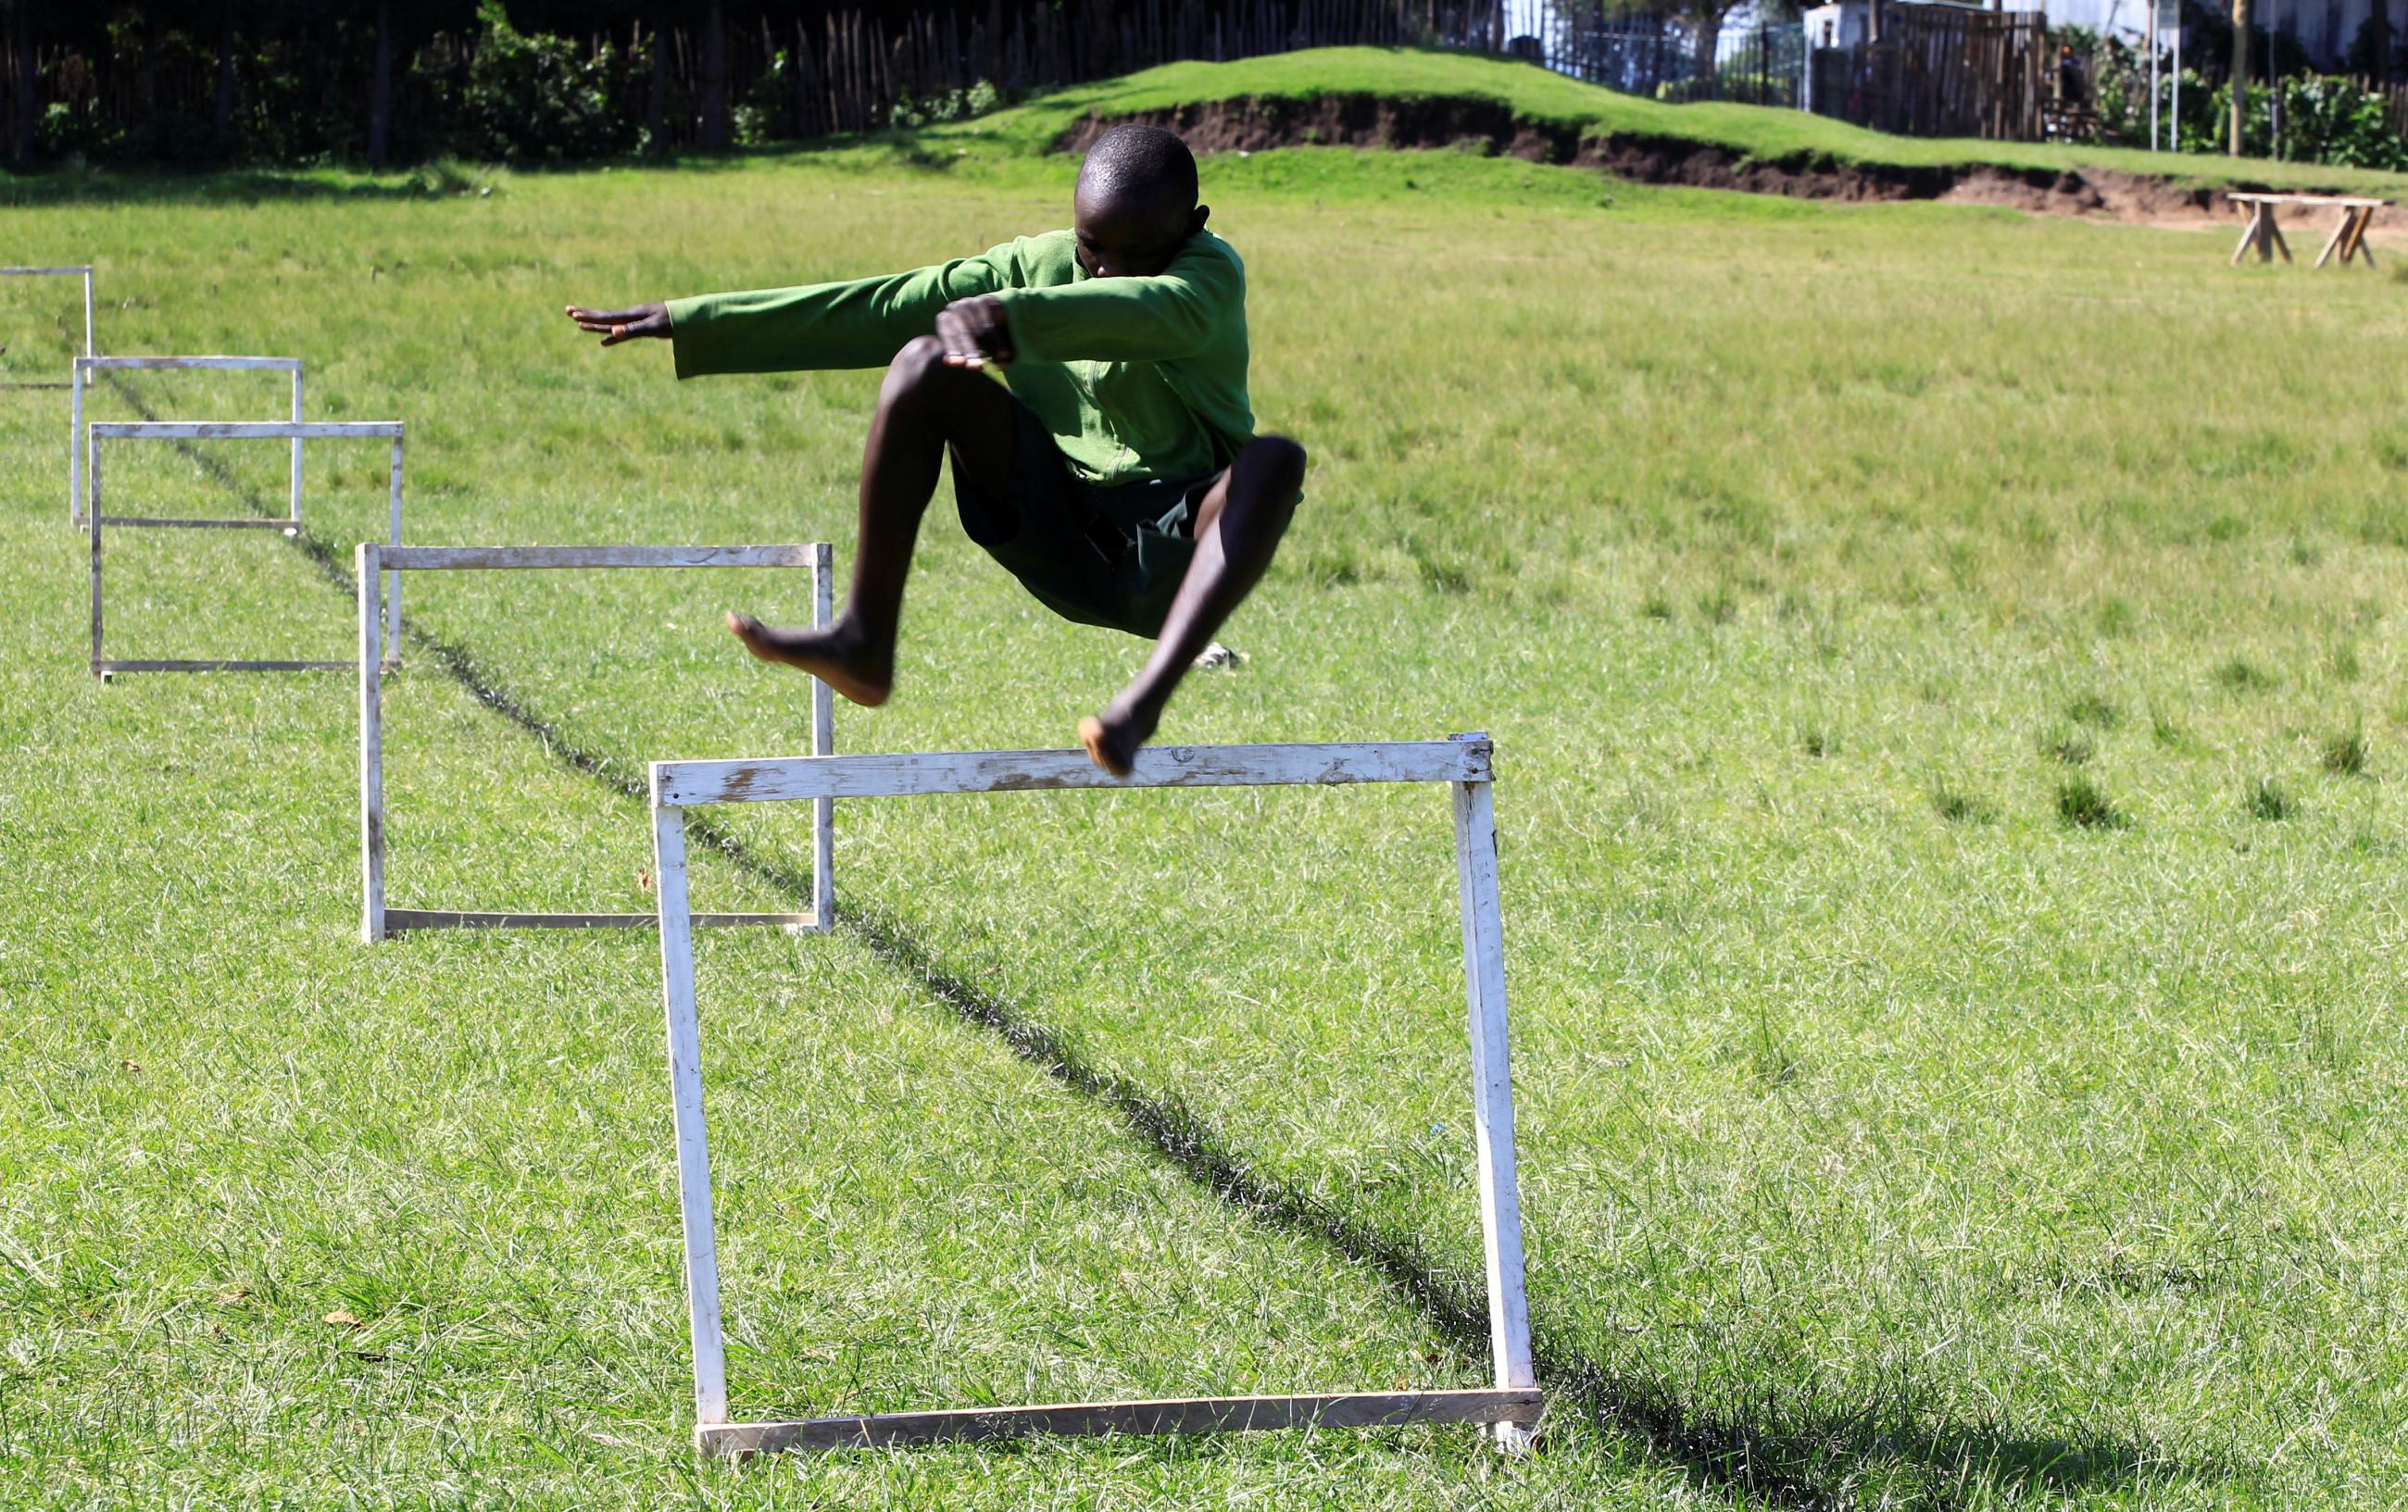 A student at Kamoi Primary School jumps a hurdle during a steeplechase exercise session at his school’s field in Elgeyo-Marakwet County, Kenya, on August 6, 2021.